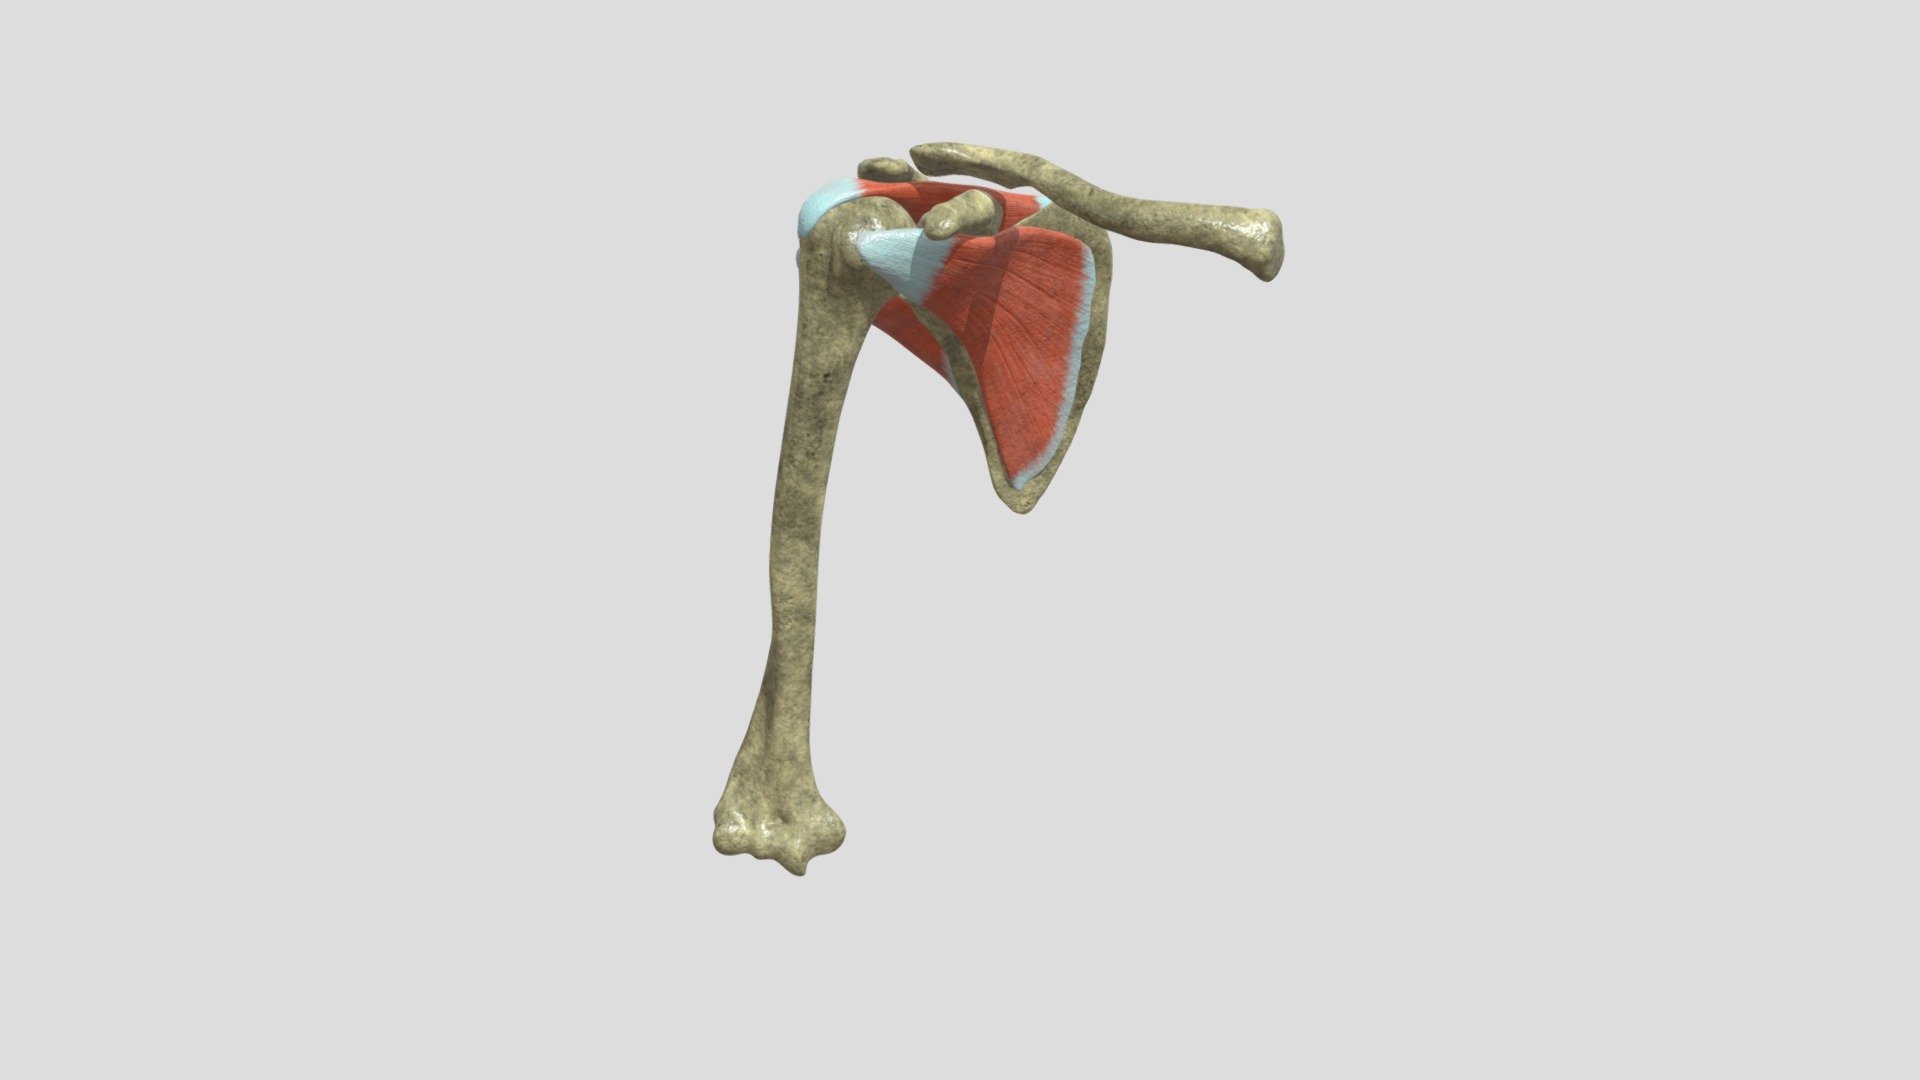 An anatomic model of the rotator cuff of the human shoulder 3d model